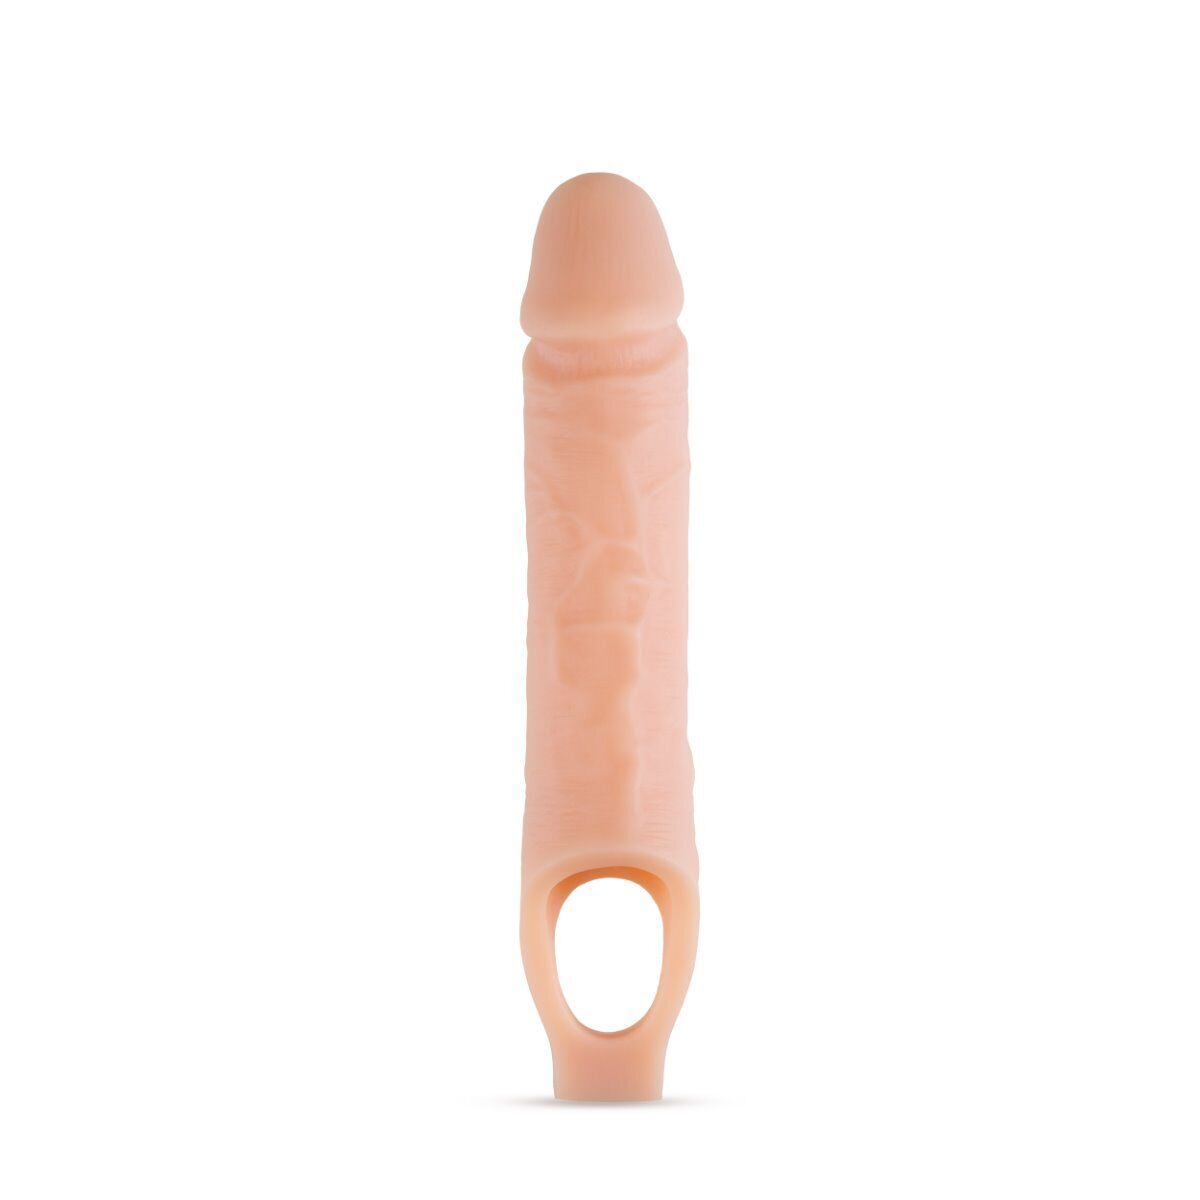 10" Silicone Cock Sheath Male Penis Extension Extender Girth Enhancer Enlarger